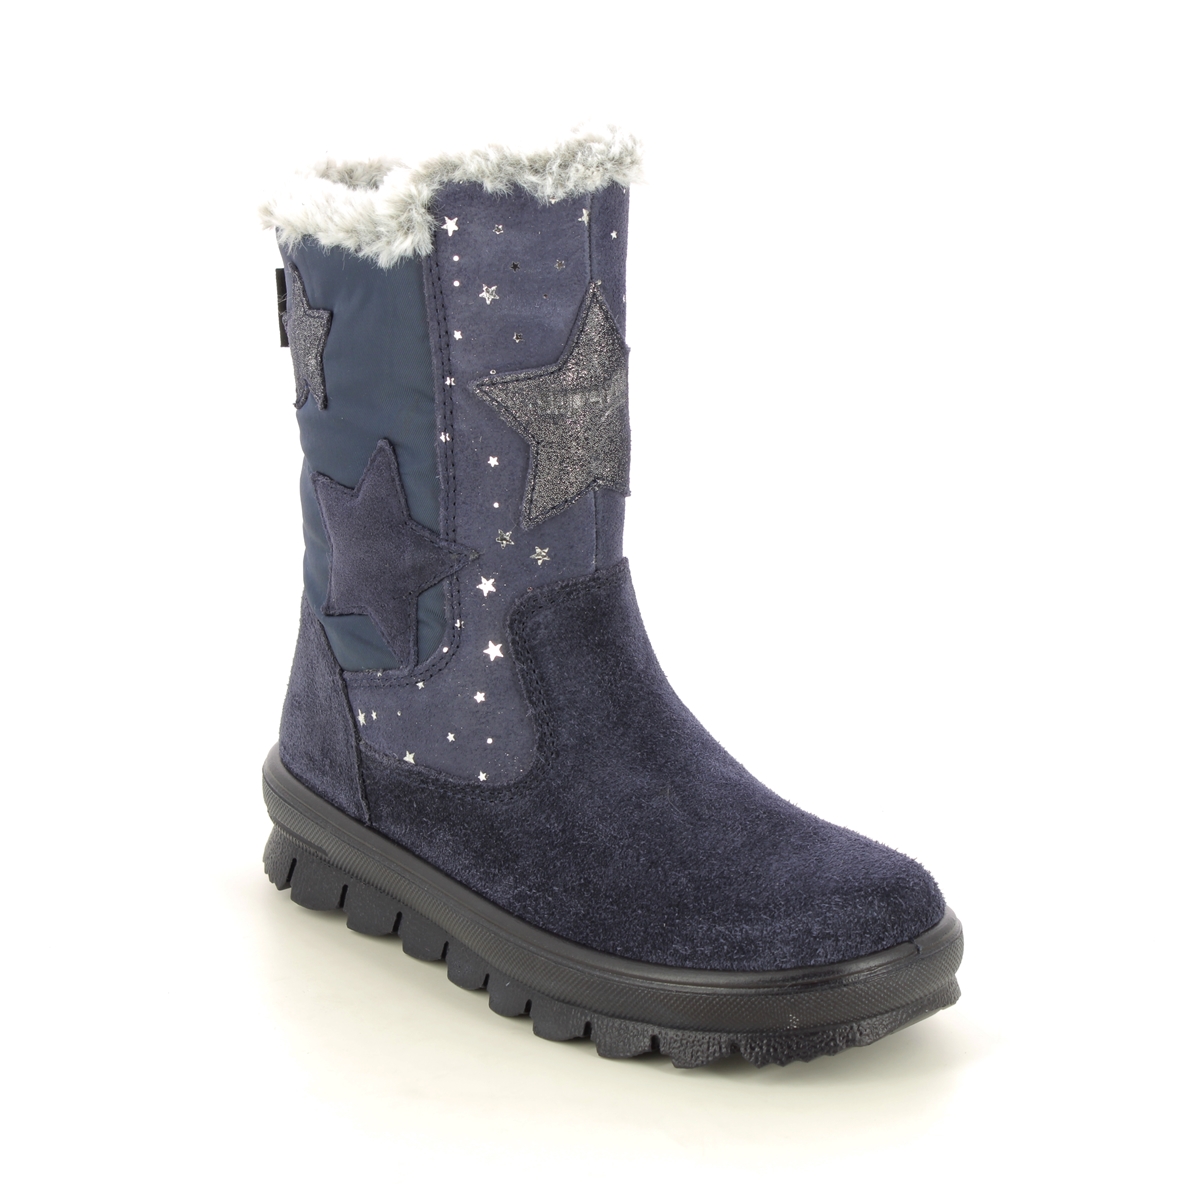 Superfit Flavia Star Gtx Navy Suede Kids Girls boots 1000219-8000 in a Plain Leather in Size 34